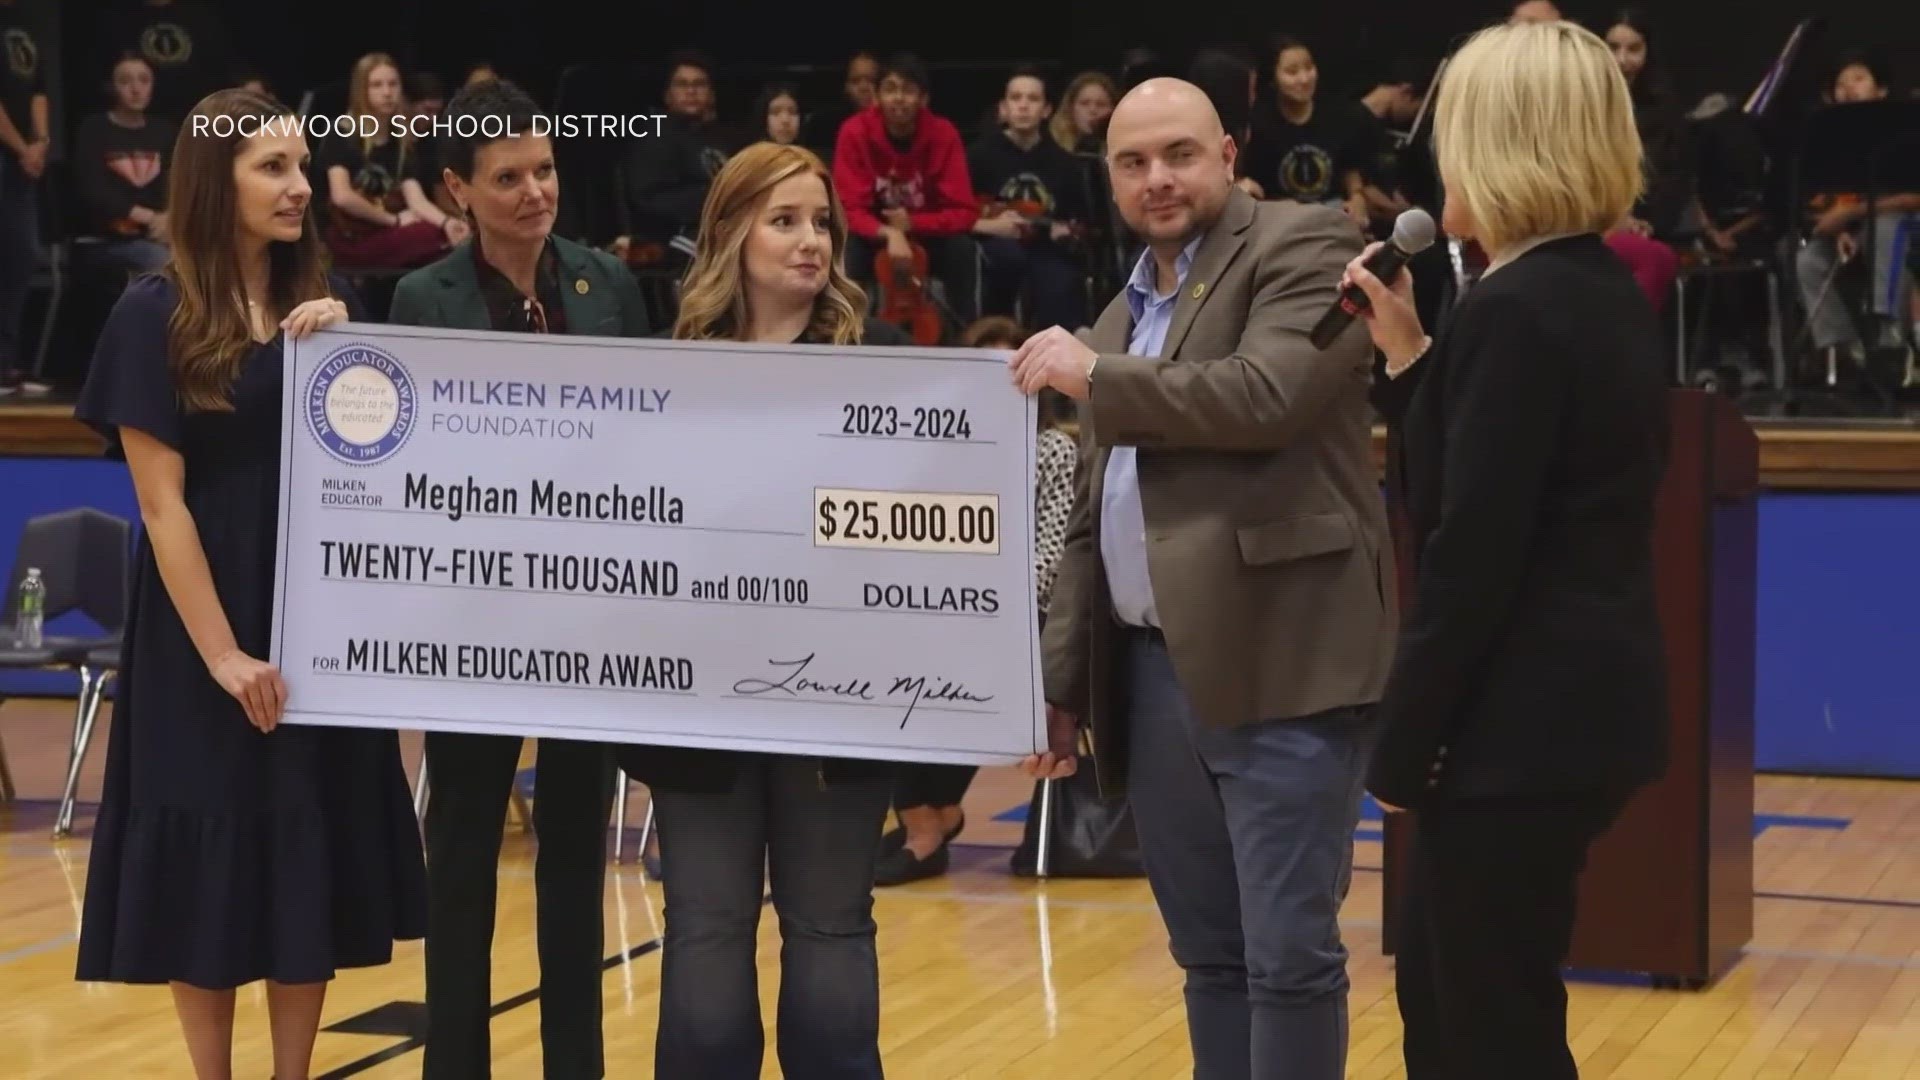 Meghan Menchella is one of 42 teachers in the nation to be a Milken Educator awardee. She teaches eighth grade U.S. history at Crestwood Middle School.